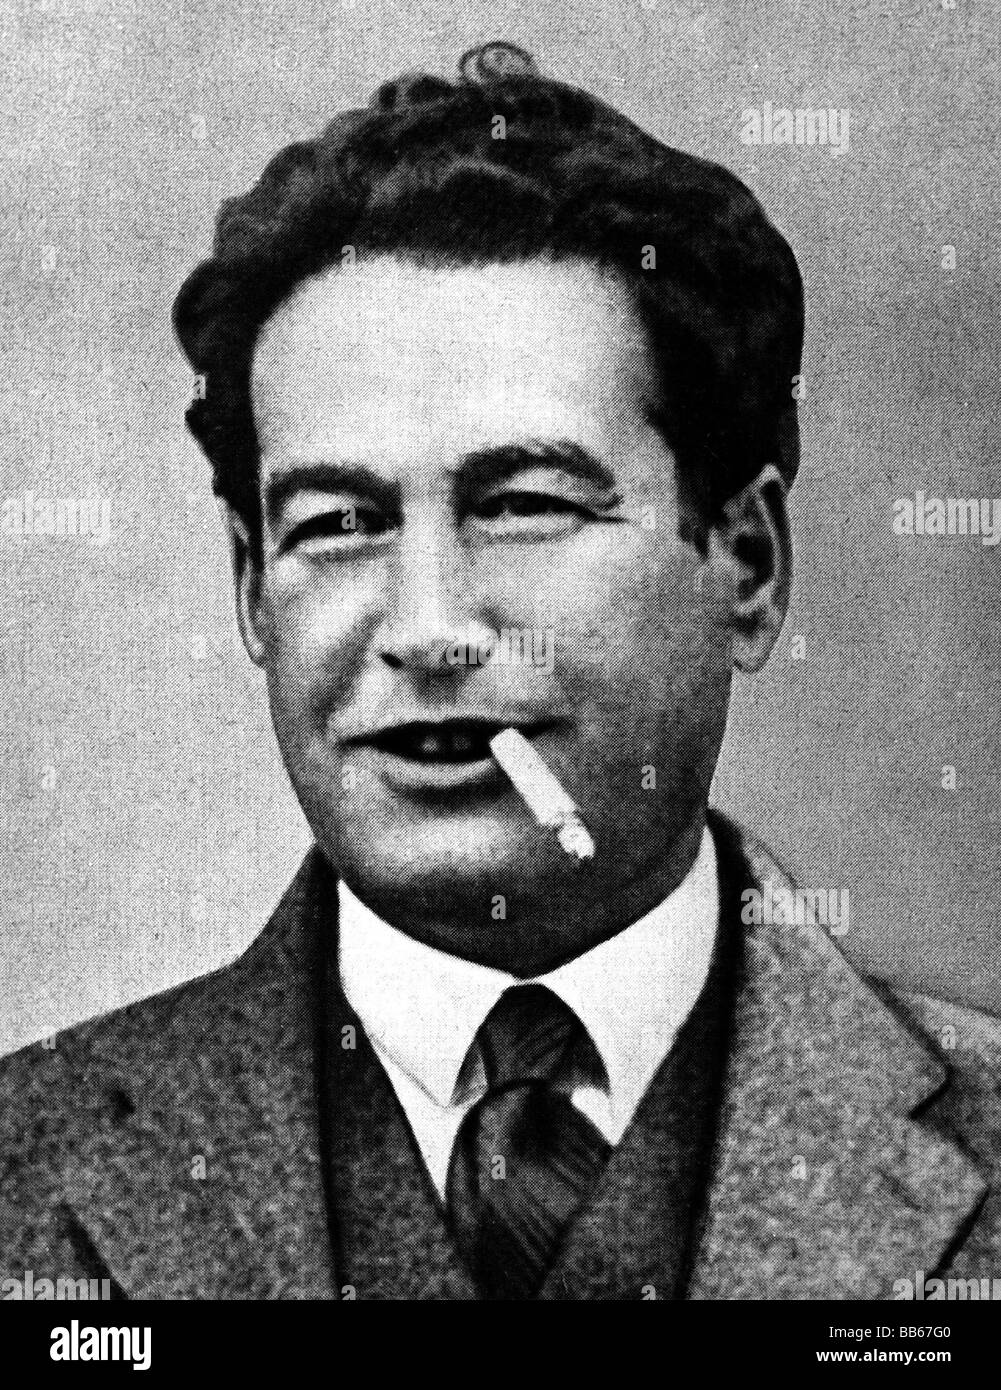 Kisch, Egon Erwin, 29.4.1885 - 31.3.1948, Czech author / writer, journalist, portrait, with cigarette in the corner of his mouth, 1920s, , Stock Photo